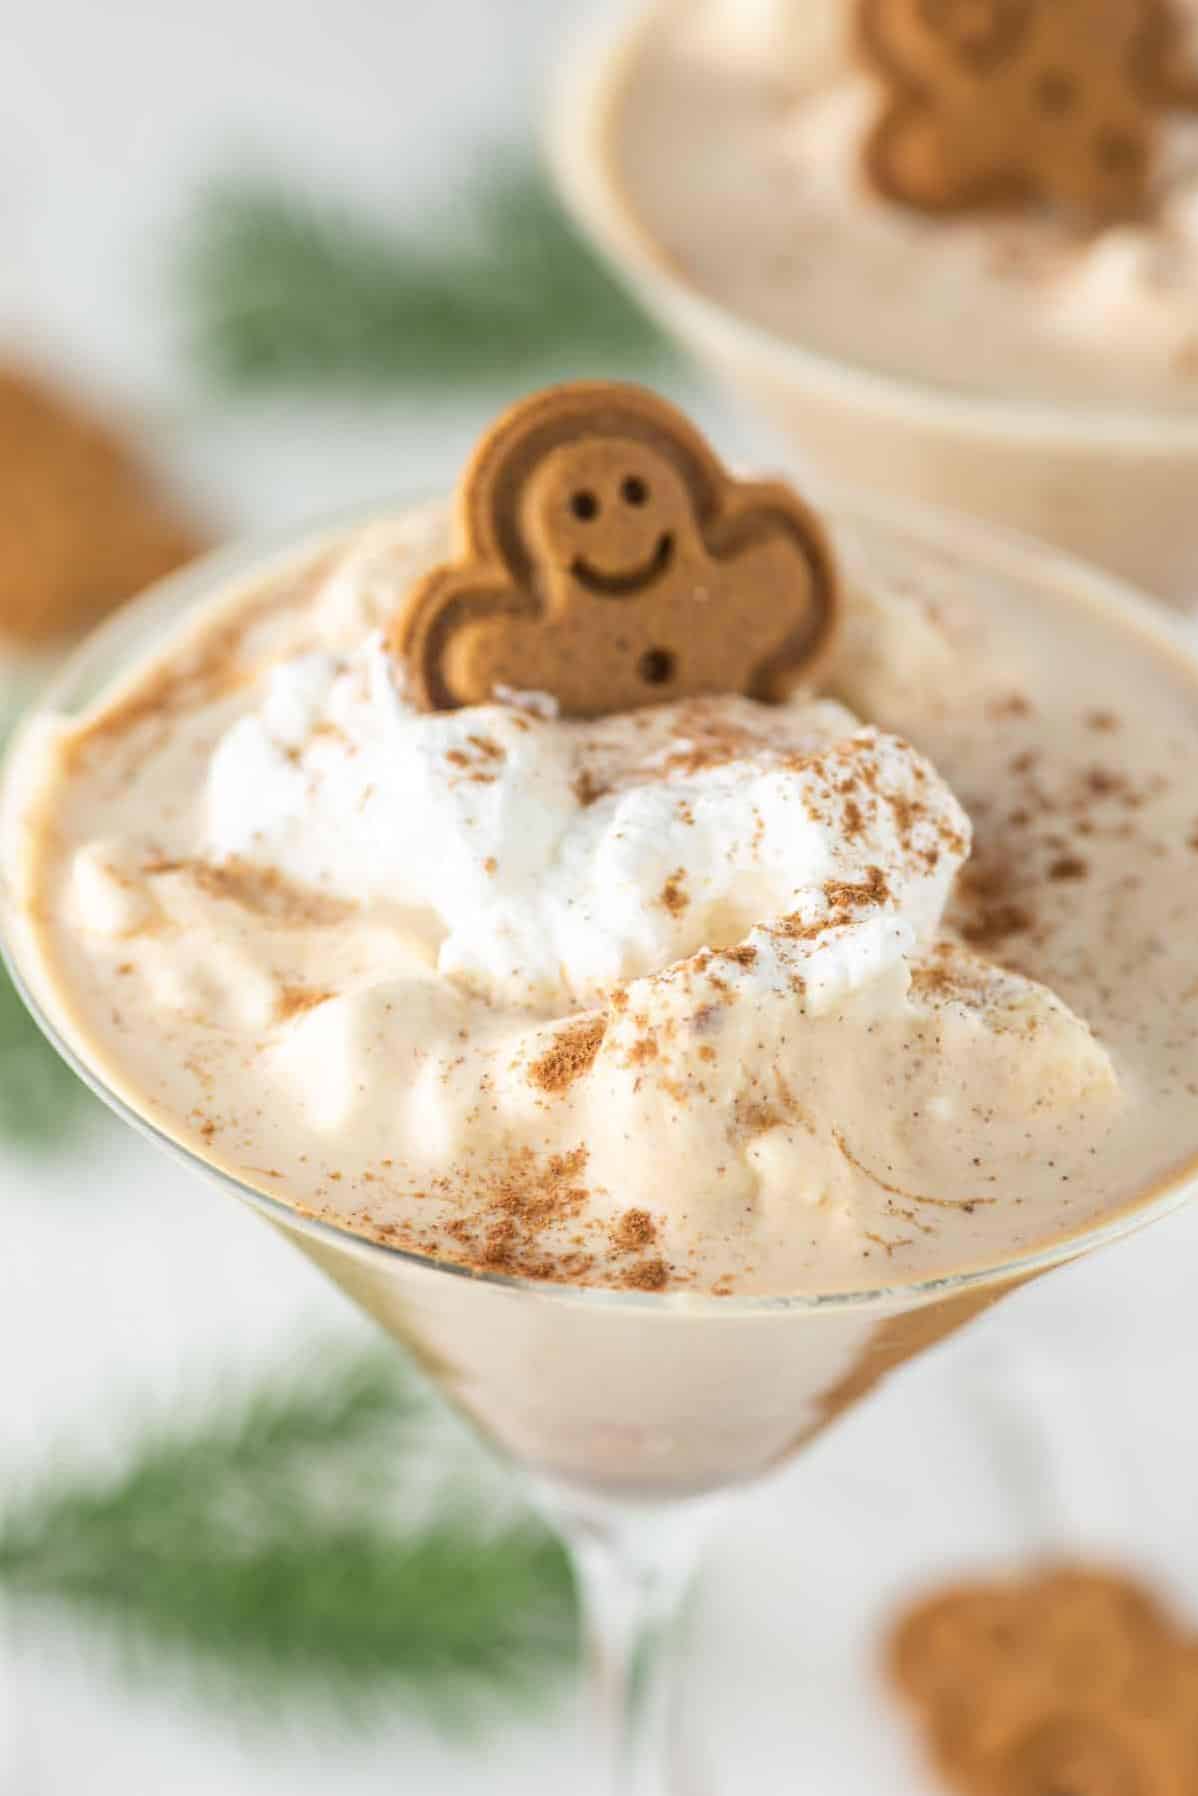  A perfect treat for a cozy winter night in.